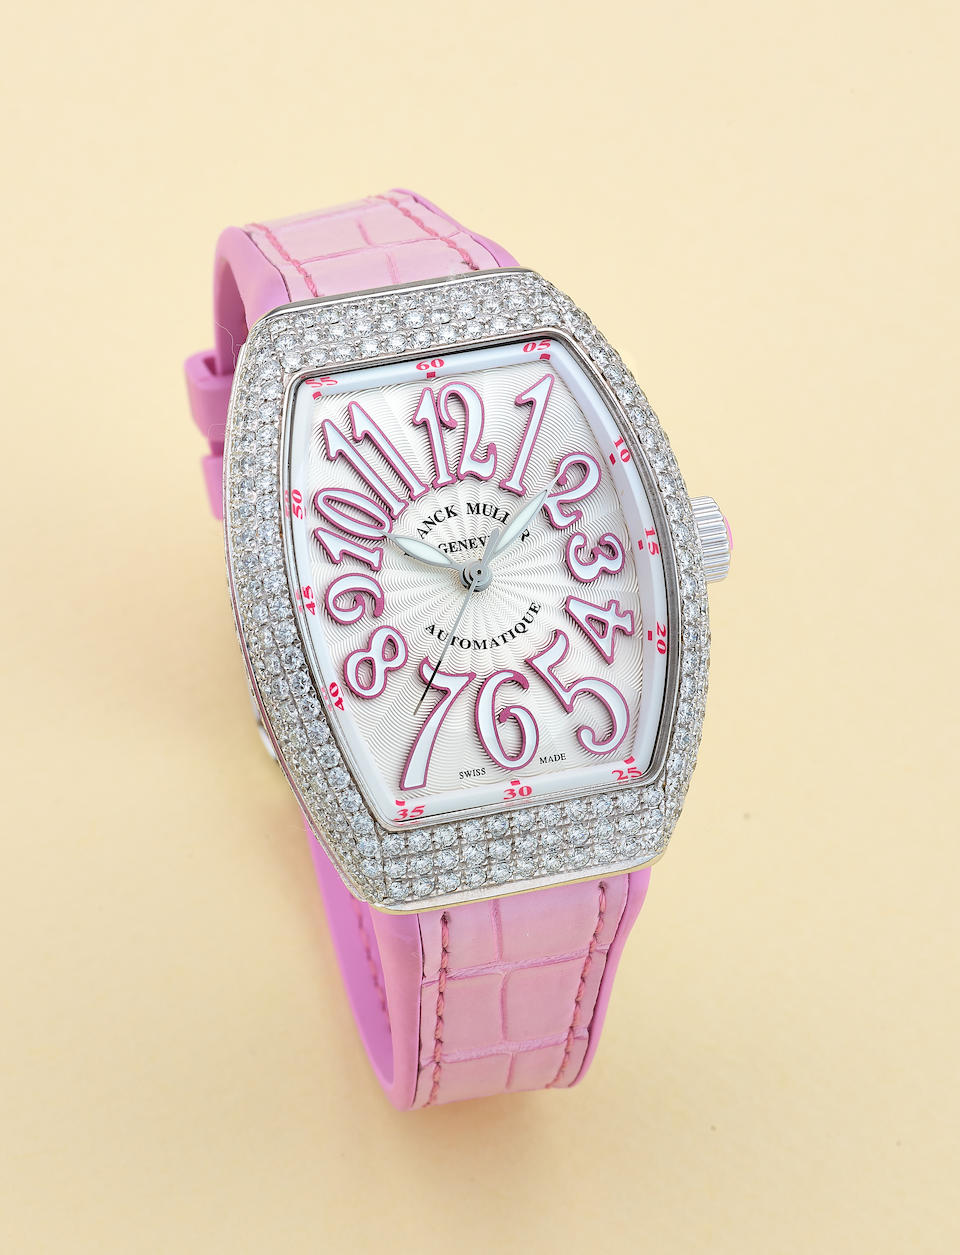 FRANCK MULLER | VANGUARD, REF.V35 SC AT FO D, A NEW OLD STOCK STAINLESS STEEL AND DIAMOND-SET WR...